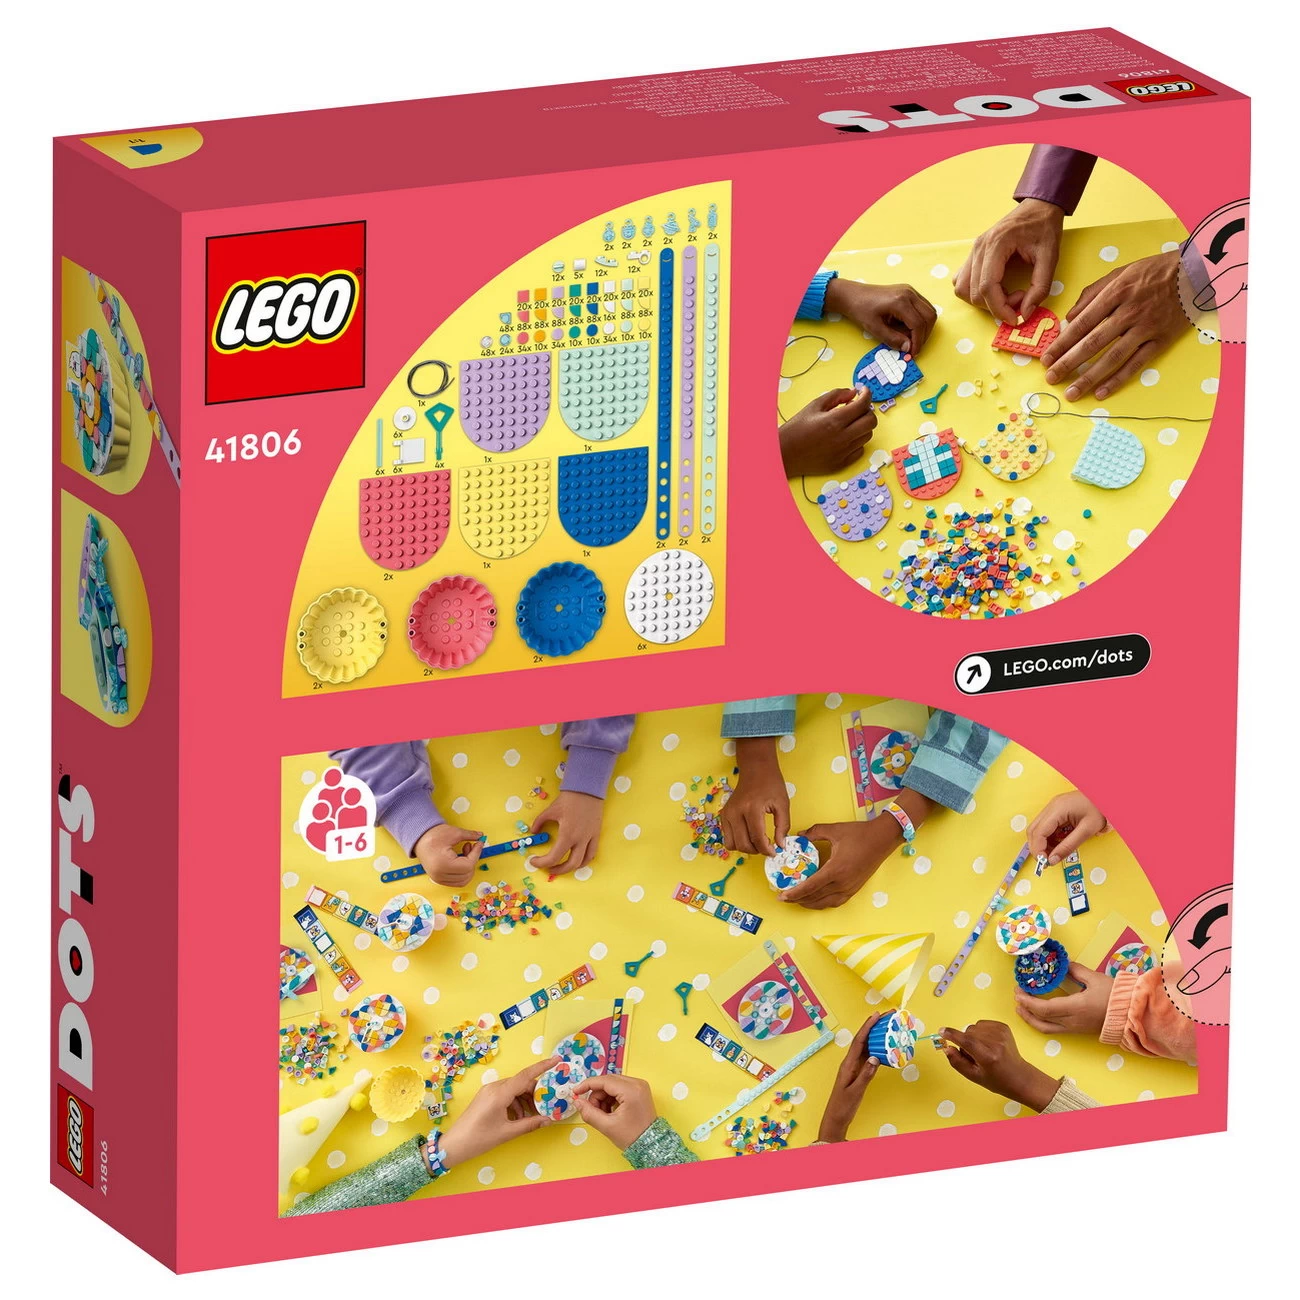 LEGO DOTs 41806 - Ultimatives Partyset